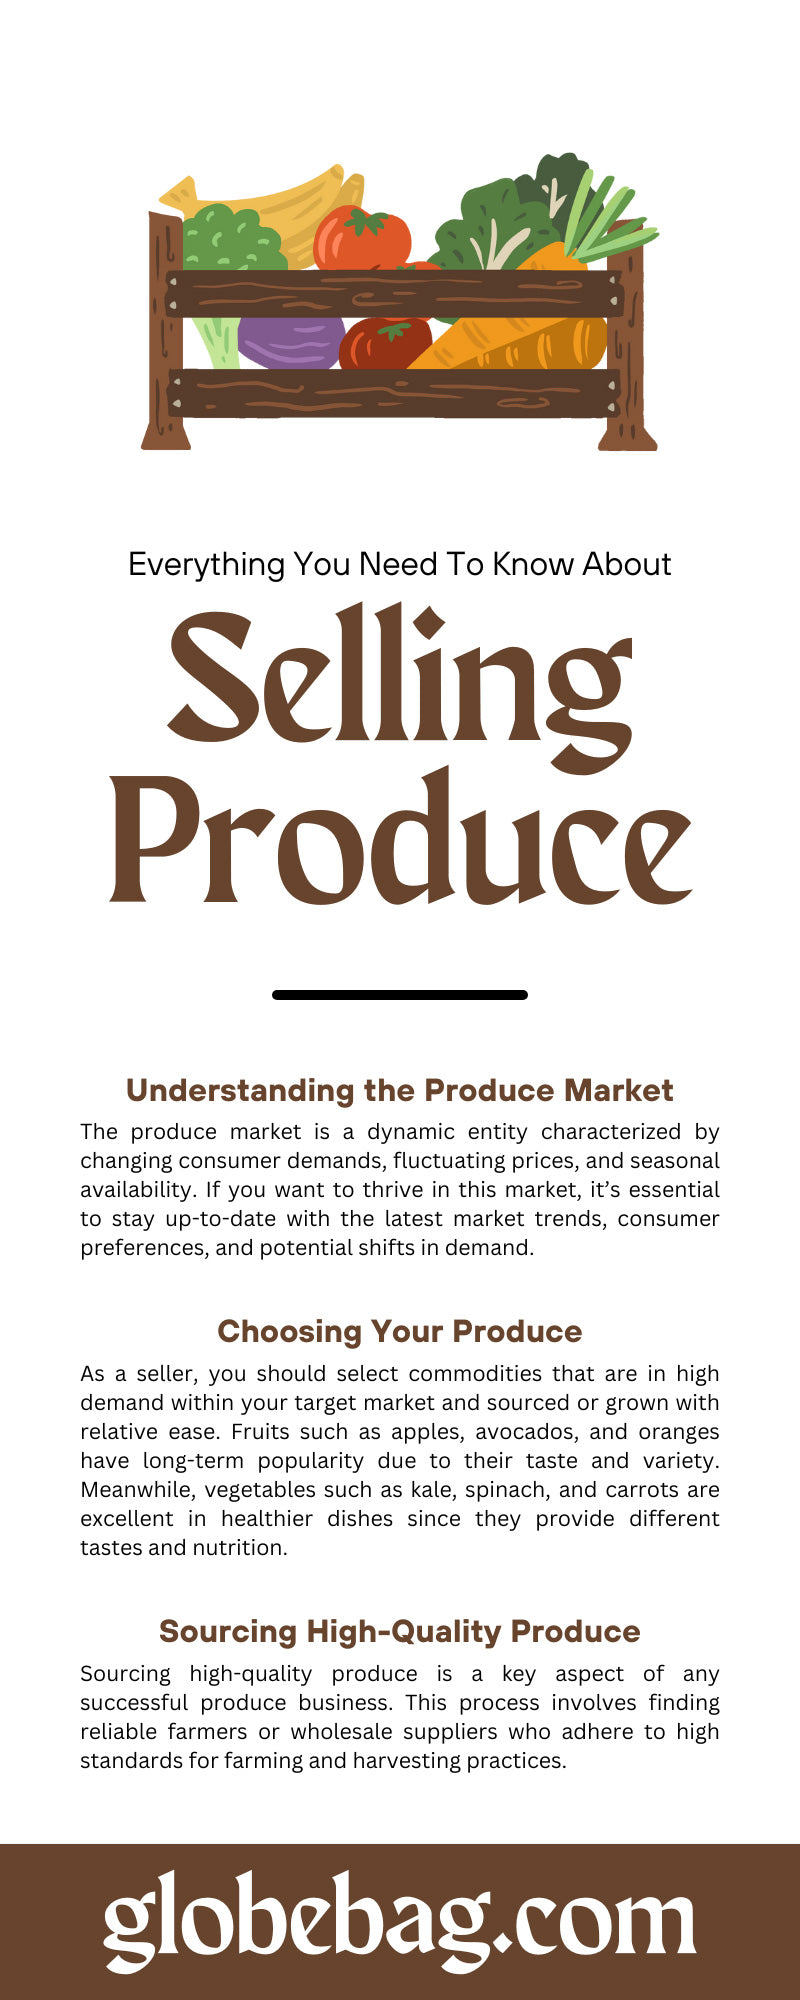 Everything You Need To Know About Selling Produce